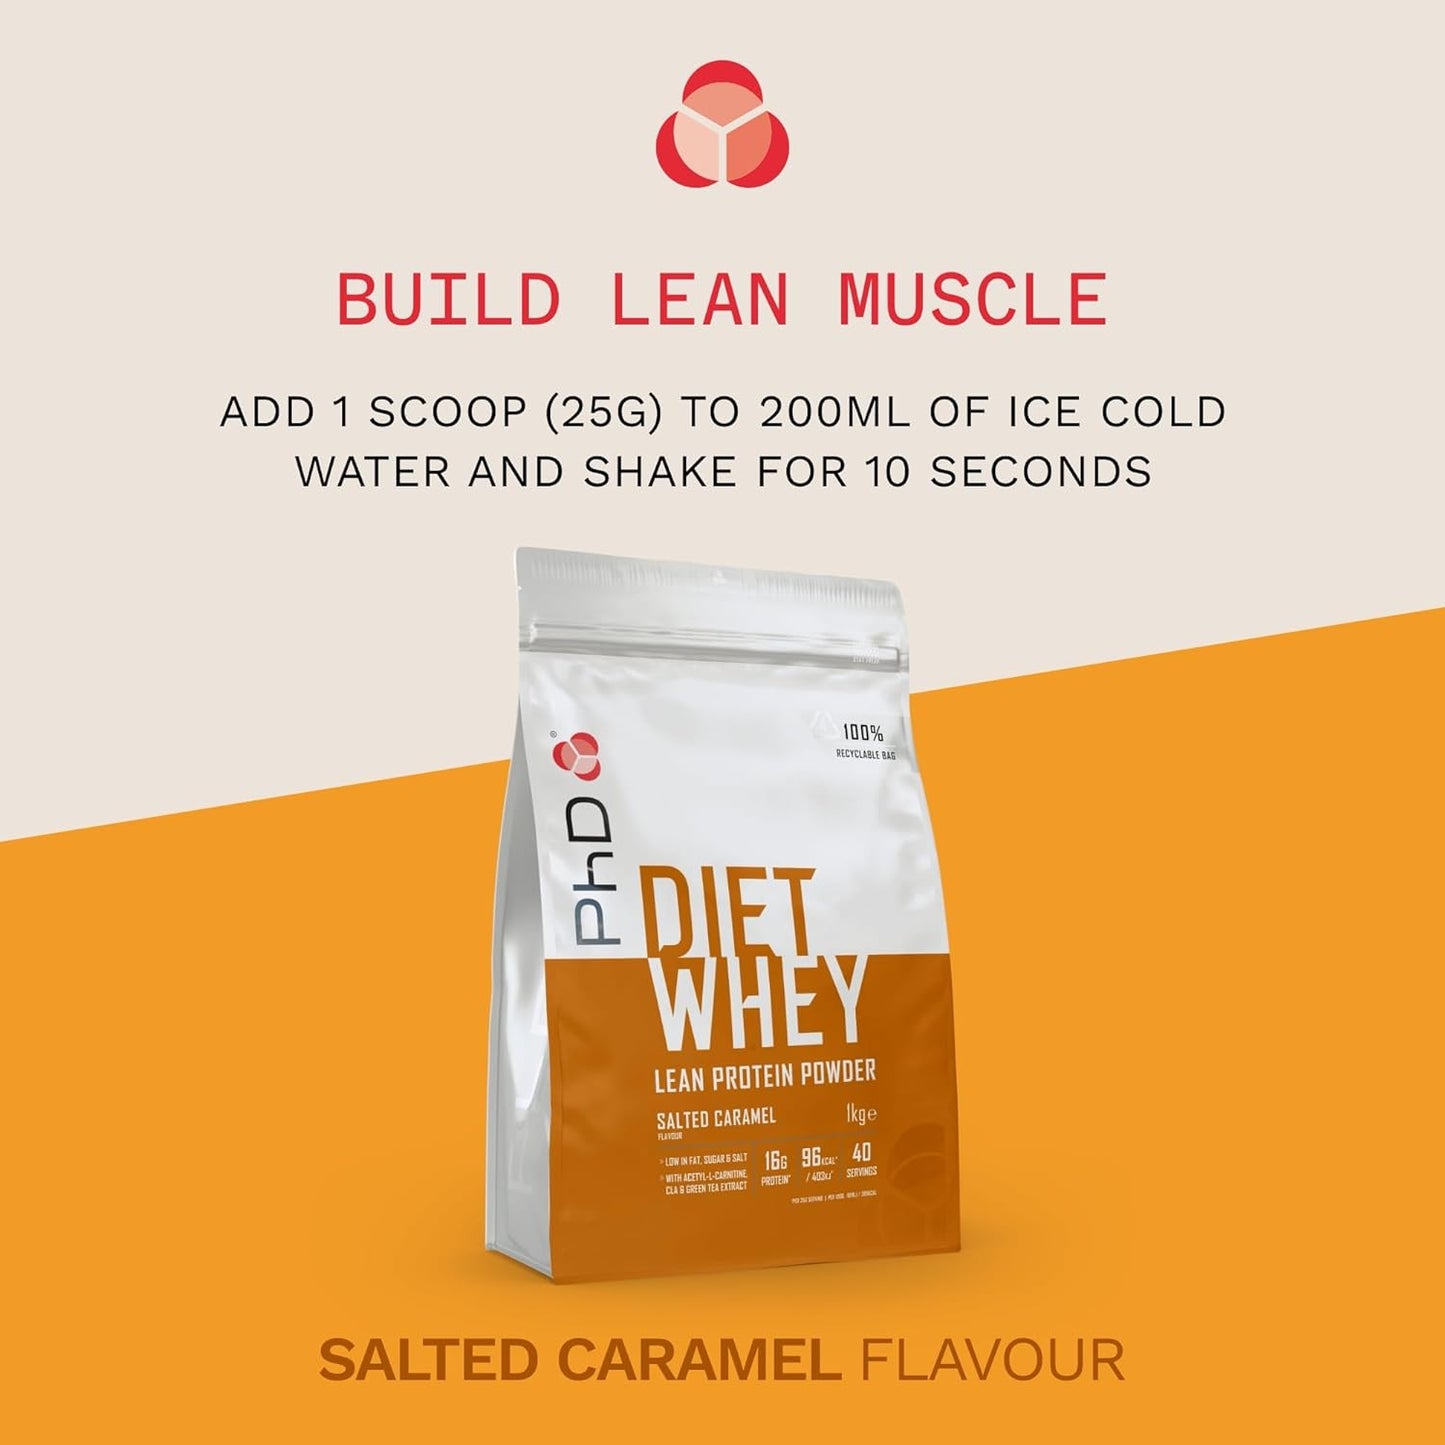 Nutrition Diet Whey Low Calorie Protein Powder, Low Carb, High Protein Lean Matrix, Salted Caramel Diet Whey Protein Powder, High Protein, 40 Servings per 1 Kg Bag